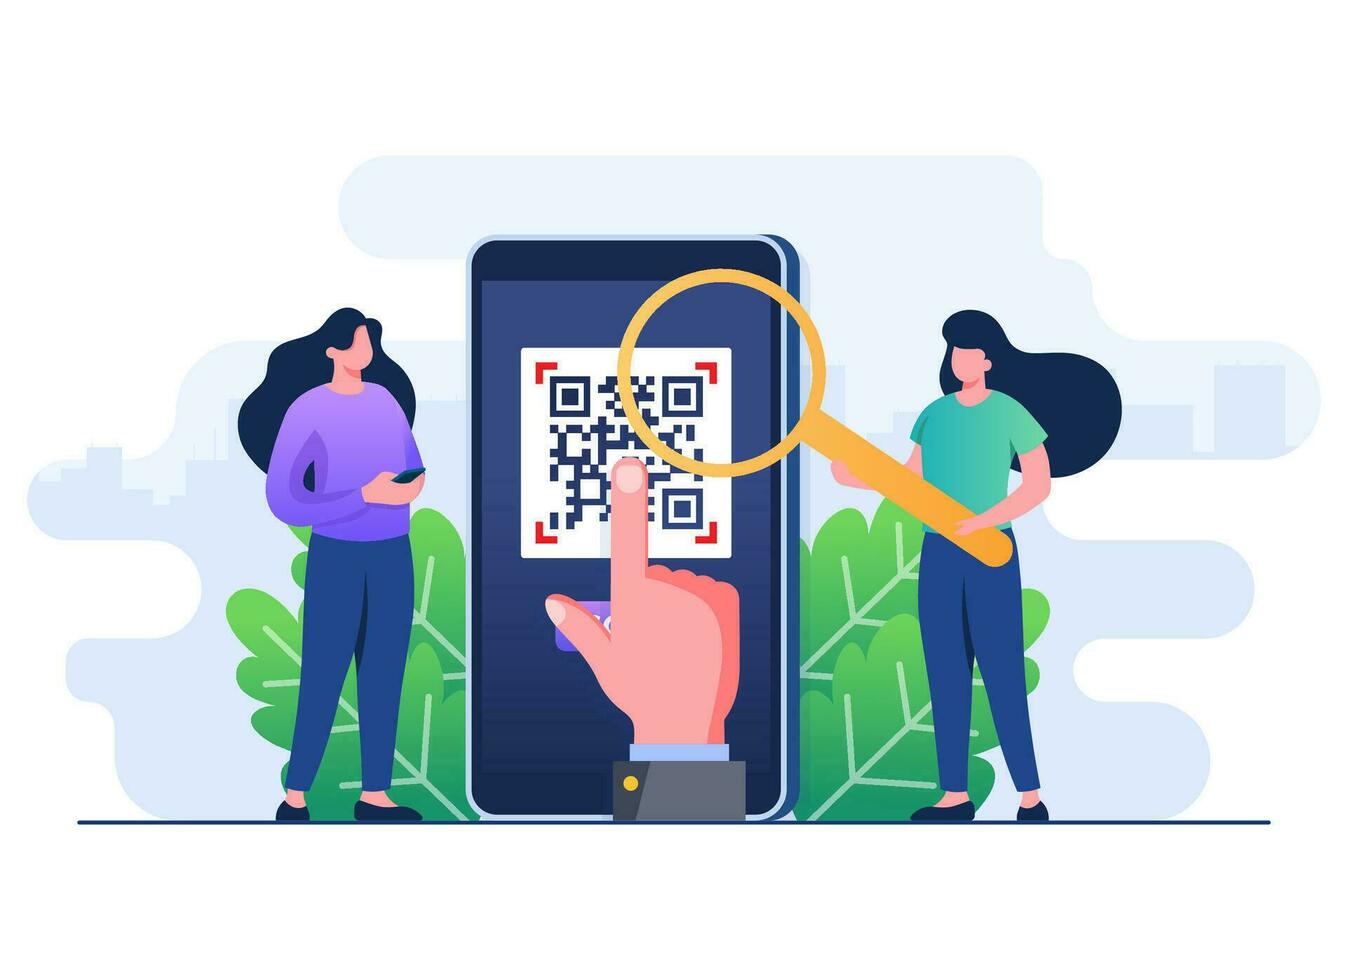 People characters scanning QR codes with smartphones, Mobilephone with QR codes, Digital wallet and modern technology concept flat illustration vector template